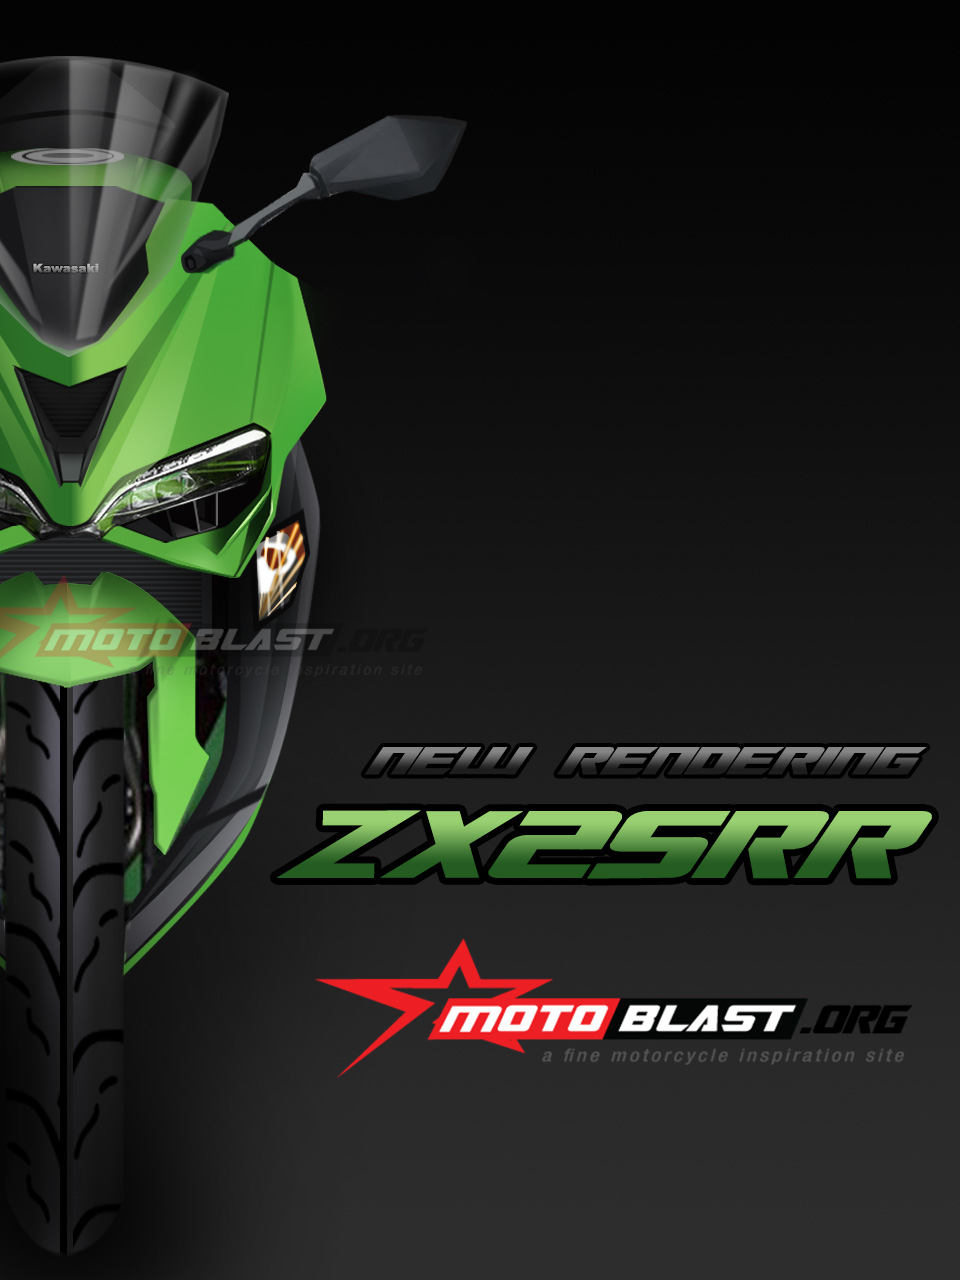 NEW RENDERING ZX25RR FRONT5